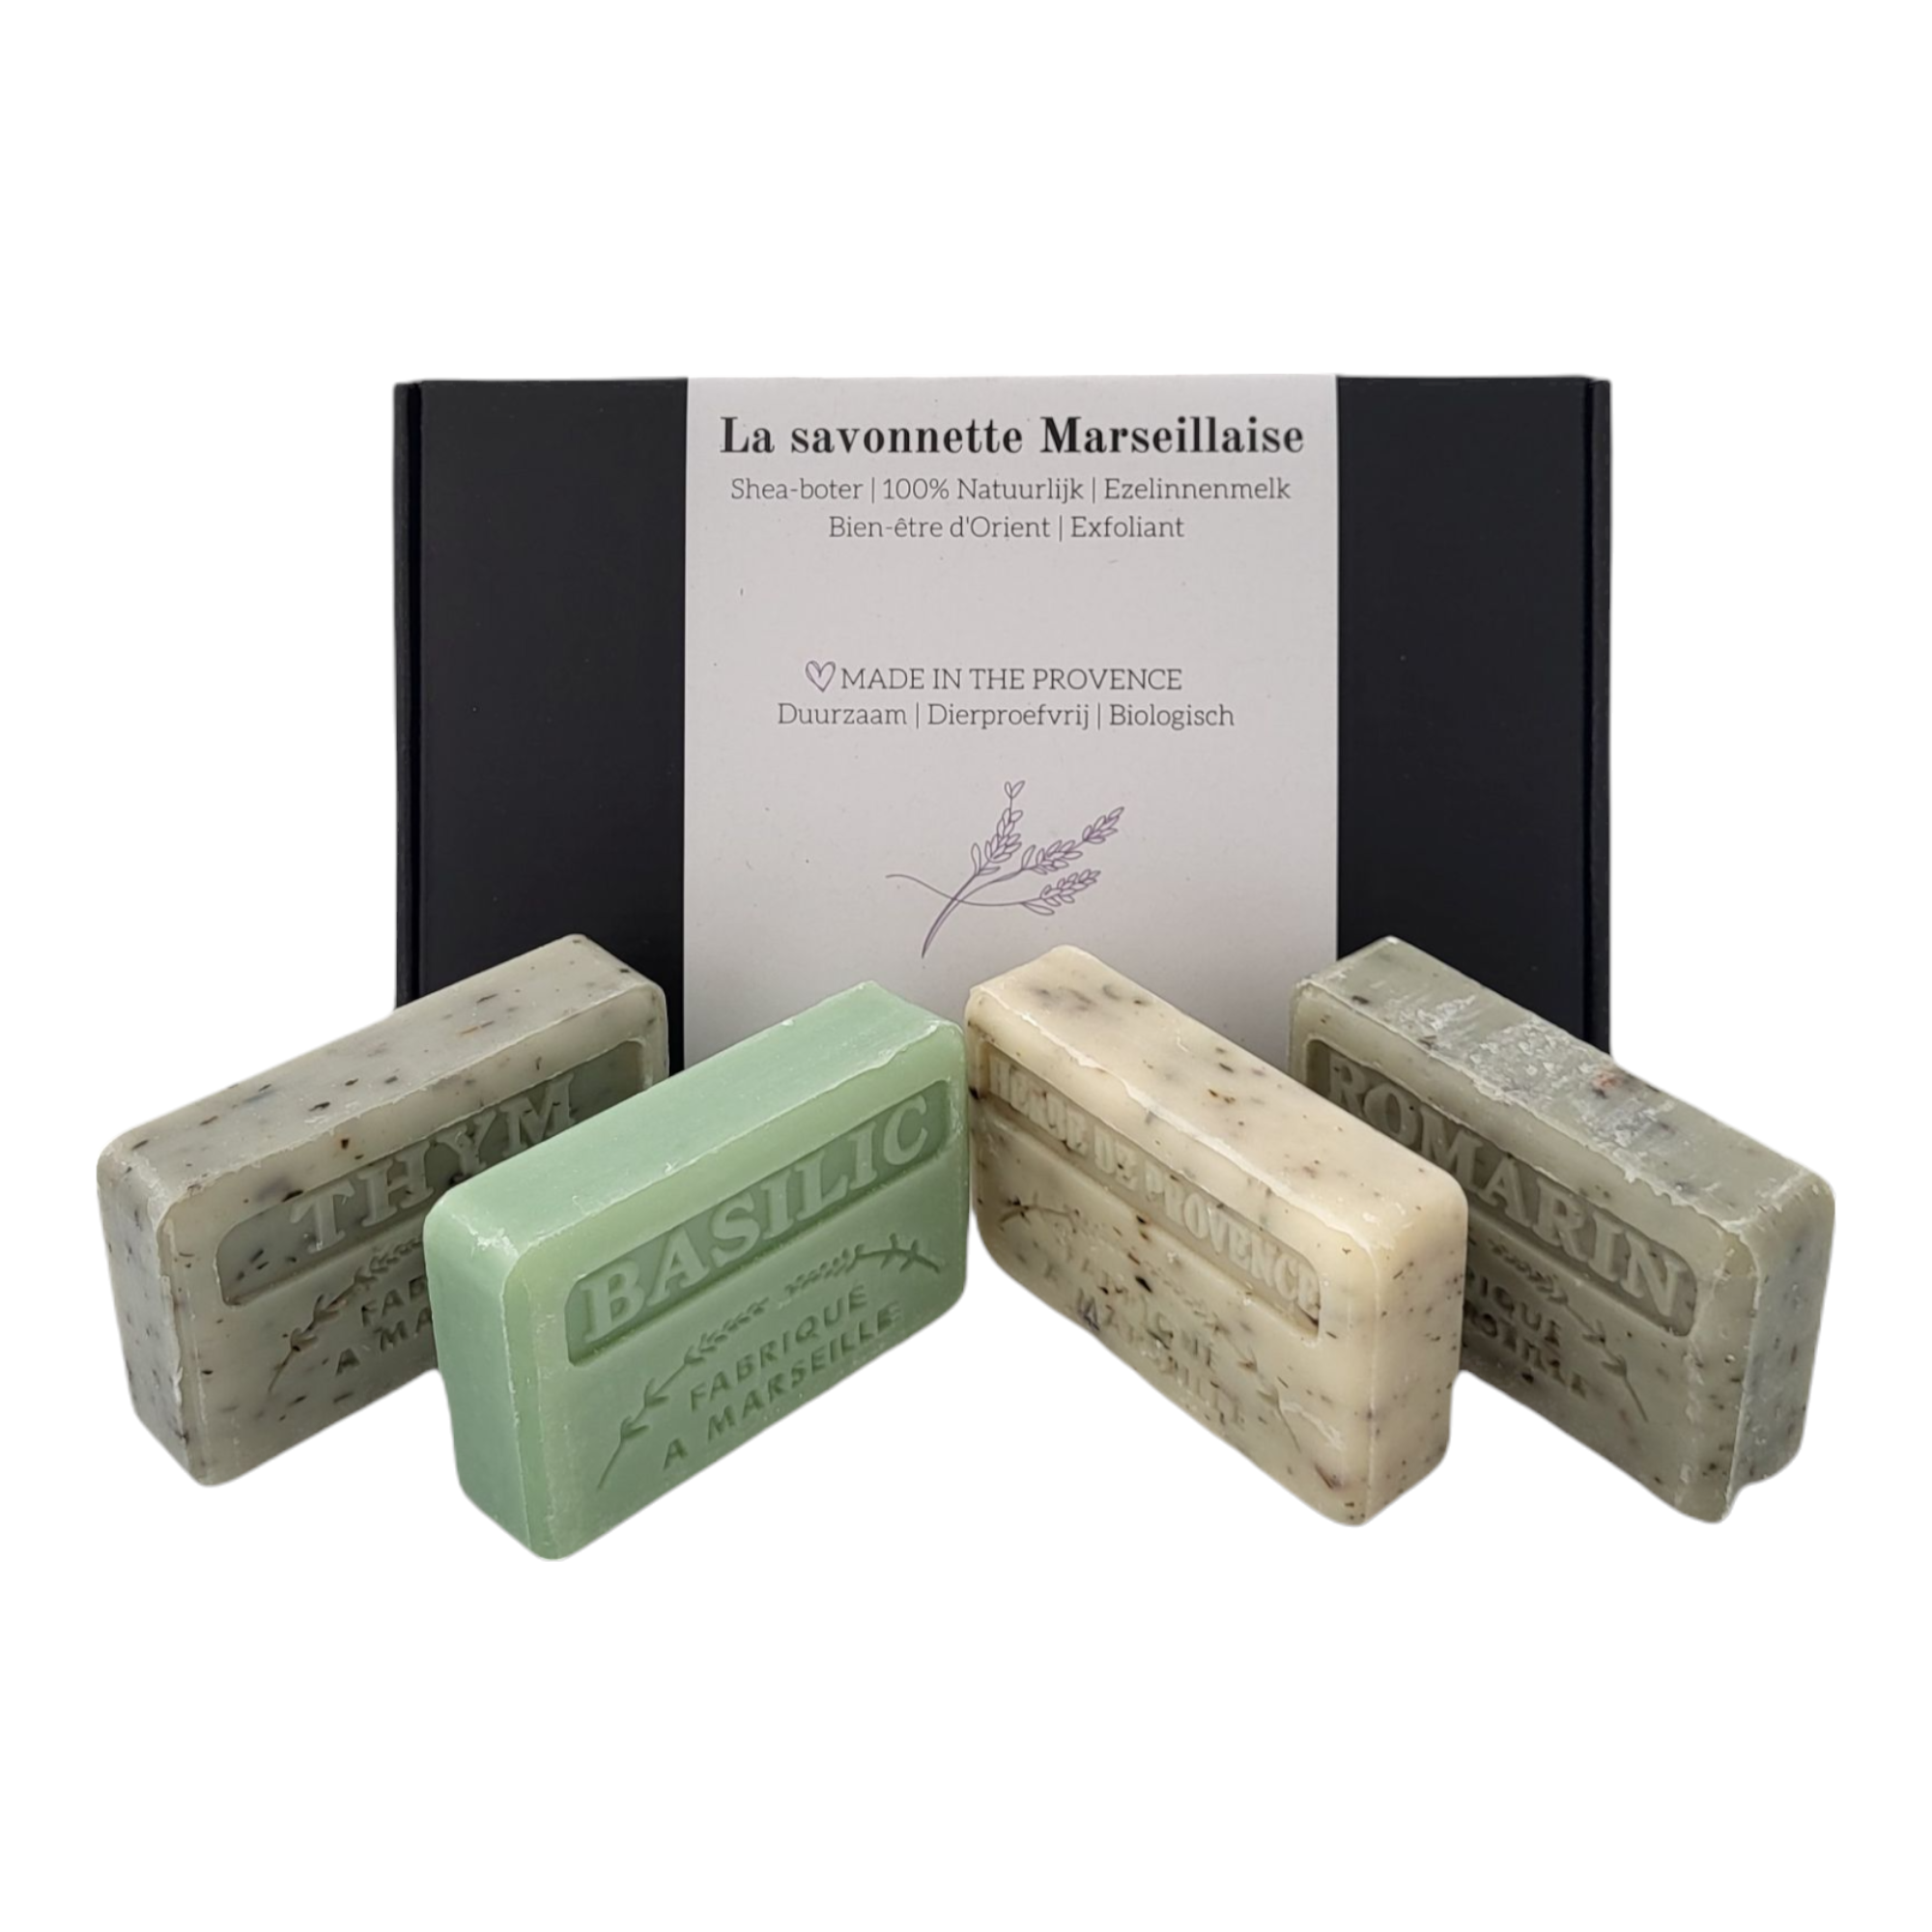 The Gorgeous 7-chakra Soap Bar Gift Pack By Arctic Soap! - Arctic Soap